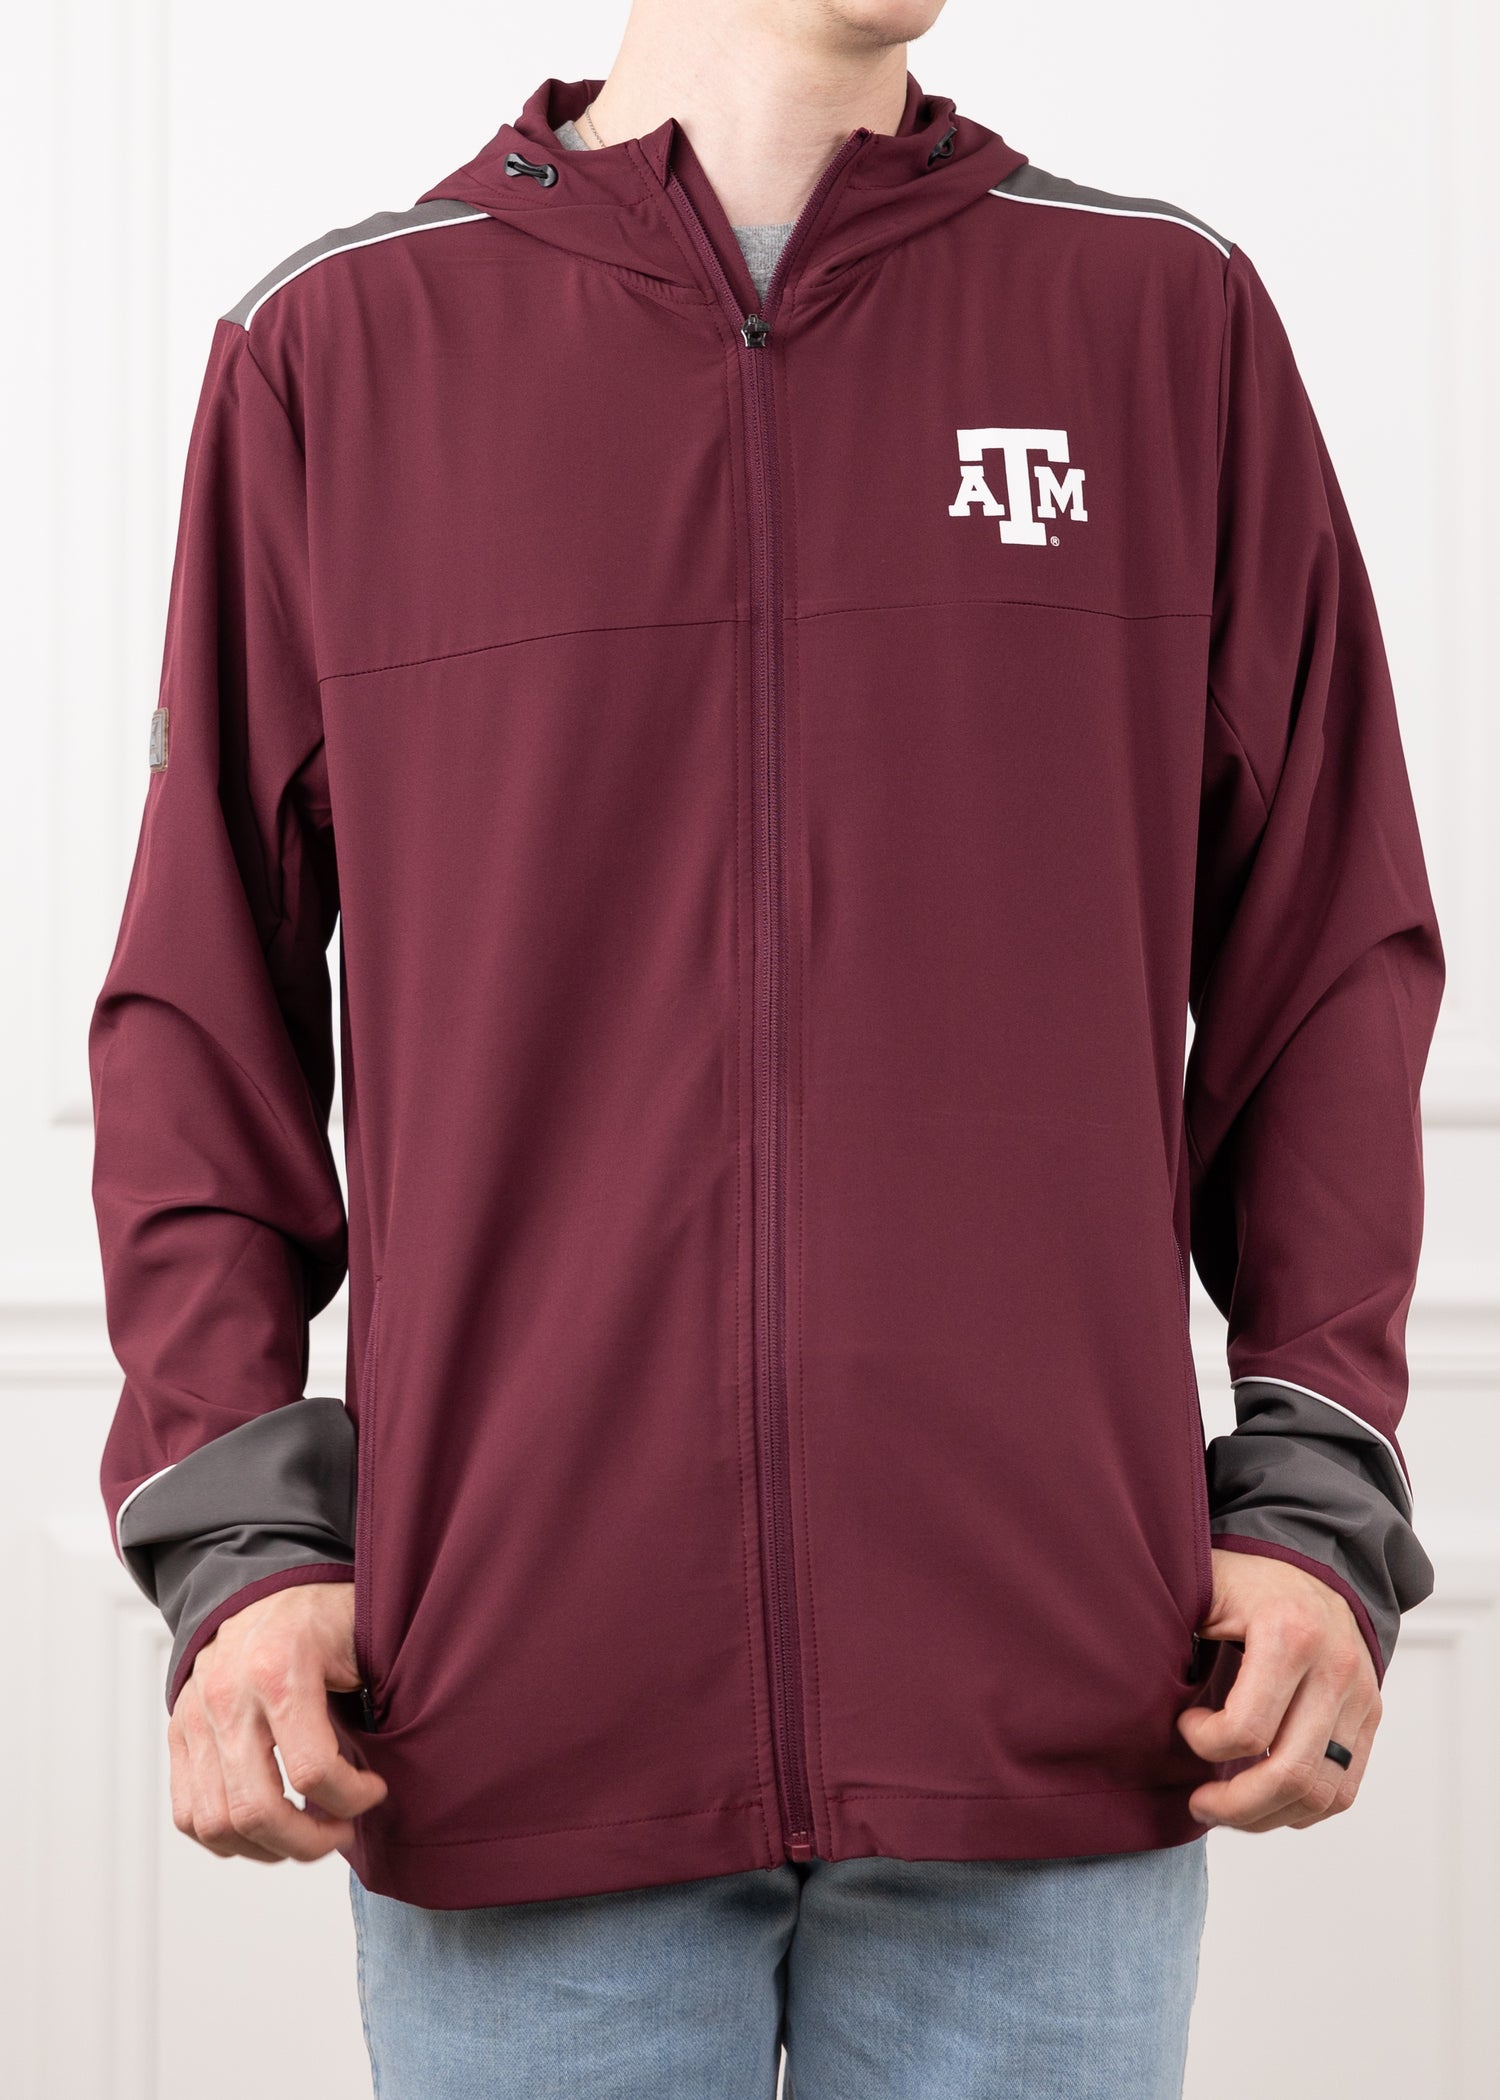 Texas A&M Maroon and Gray Lightweight Full Zip Hoodie